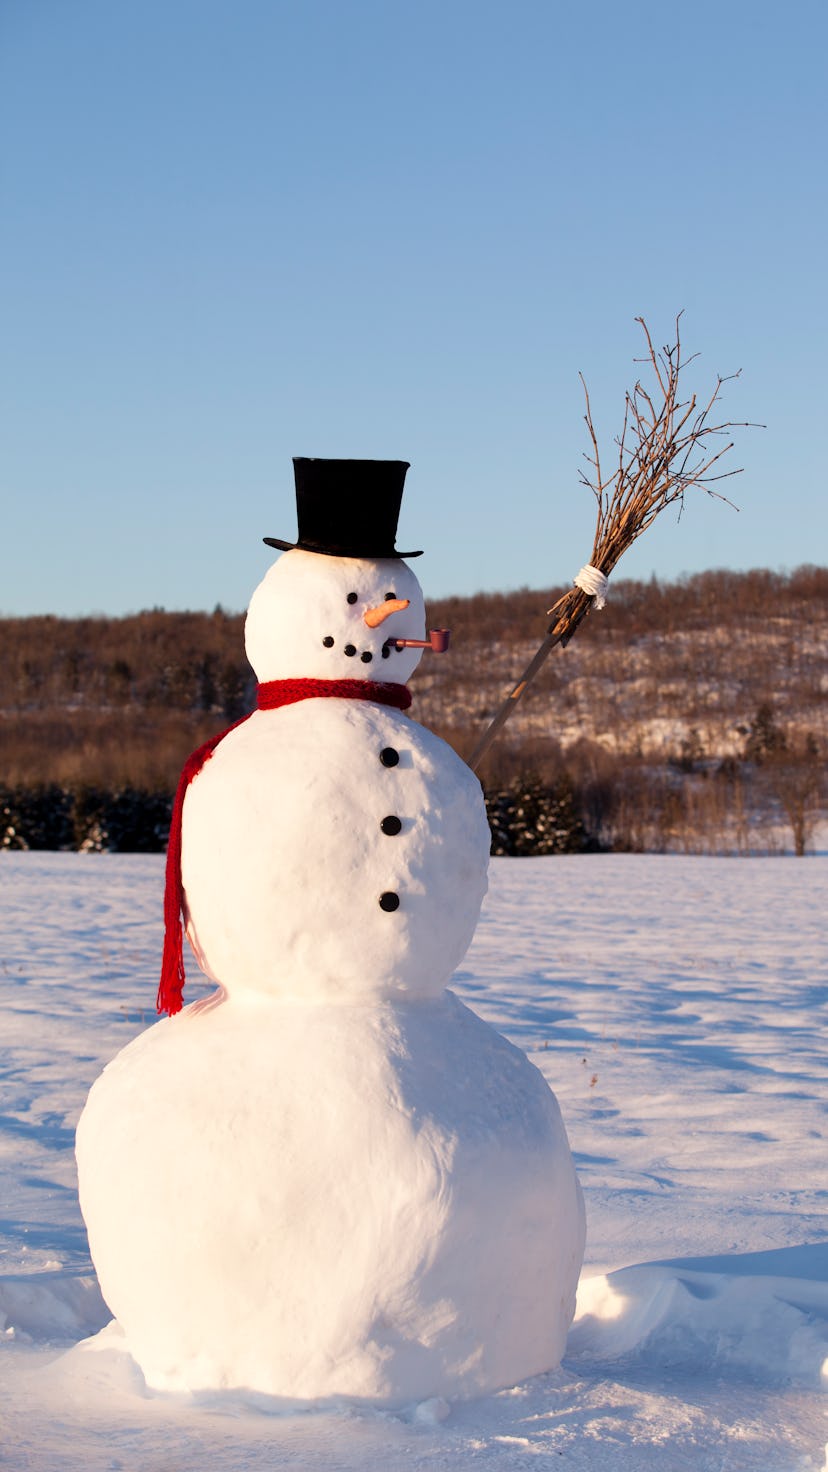 diy and kits to build a snowman